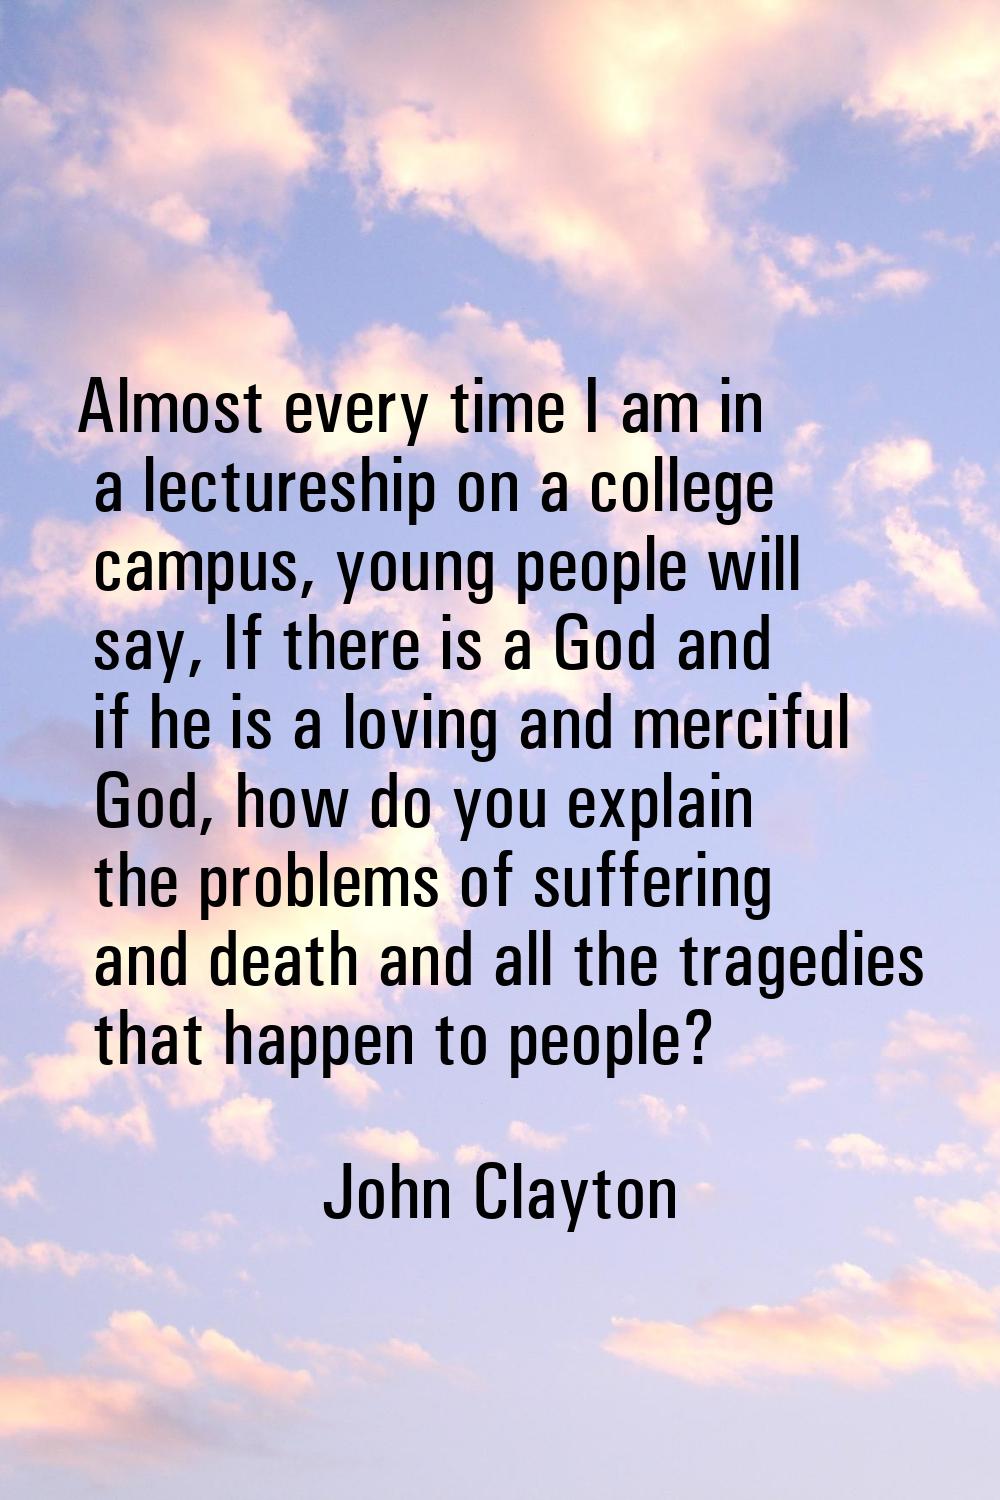 Almost every time I am in a lectureship on a college campus, young people will say, If there is a G